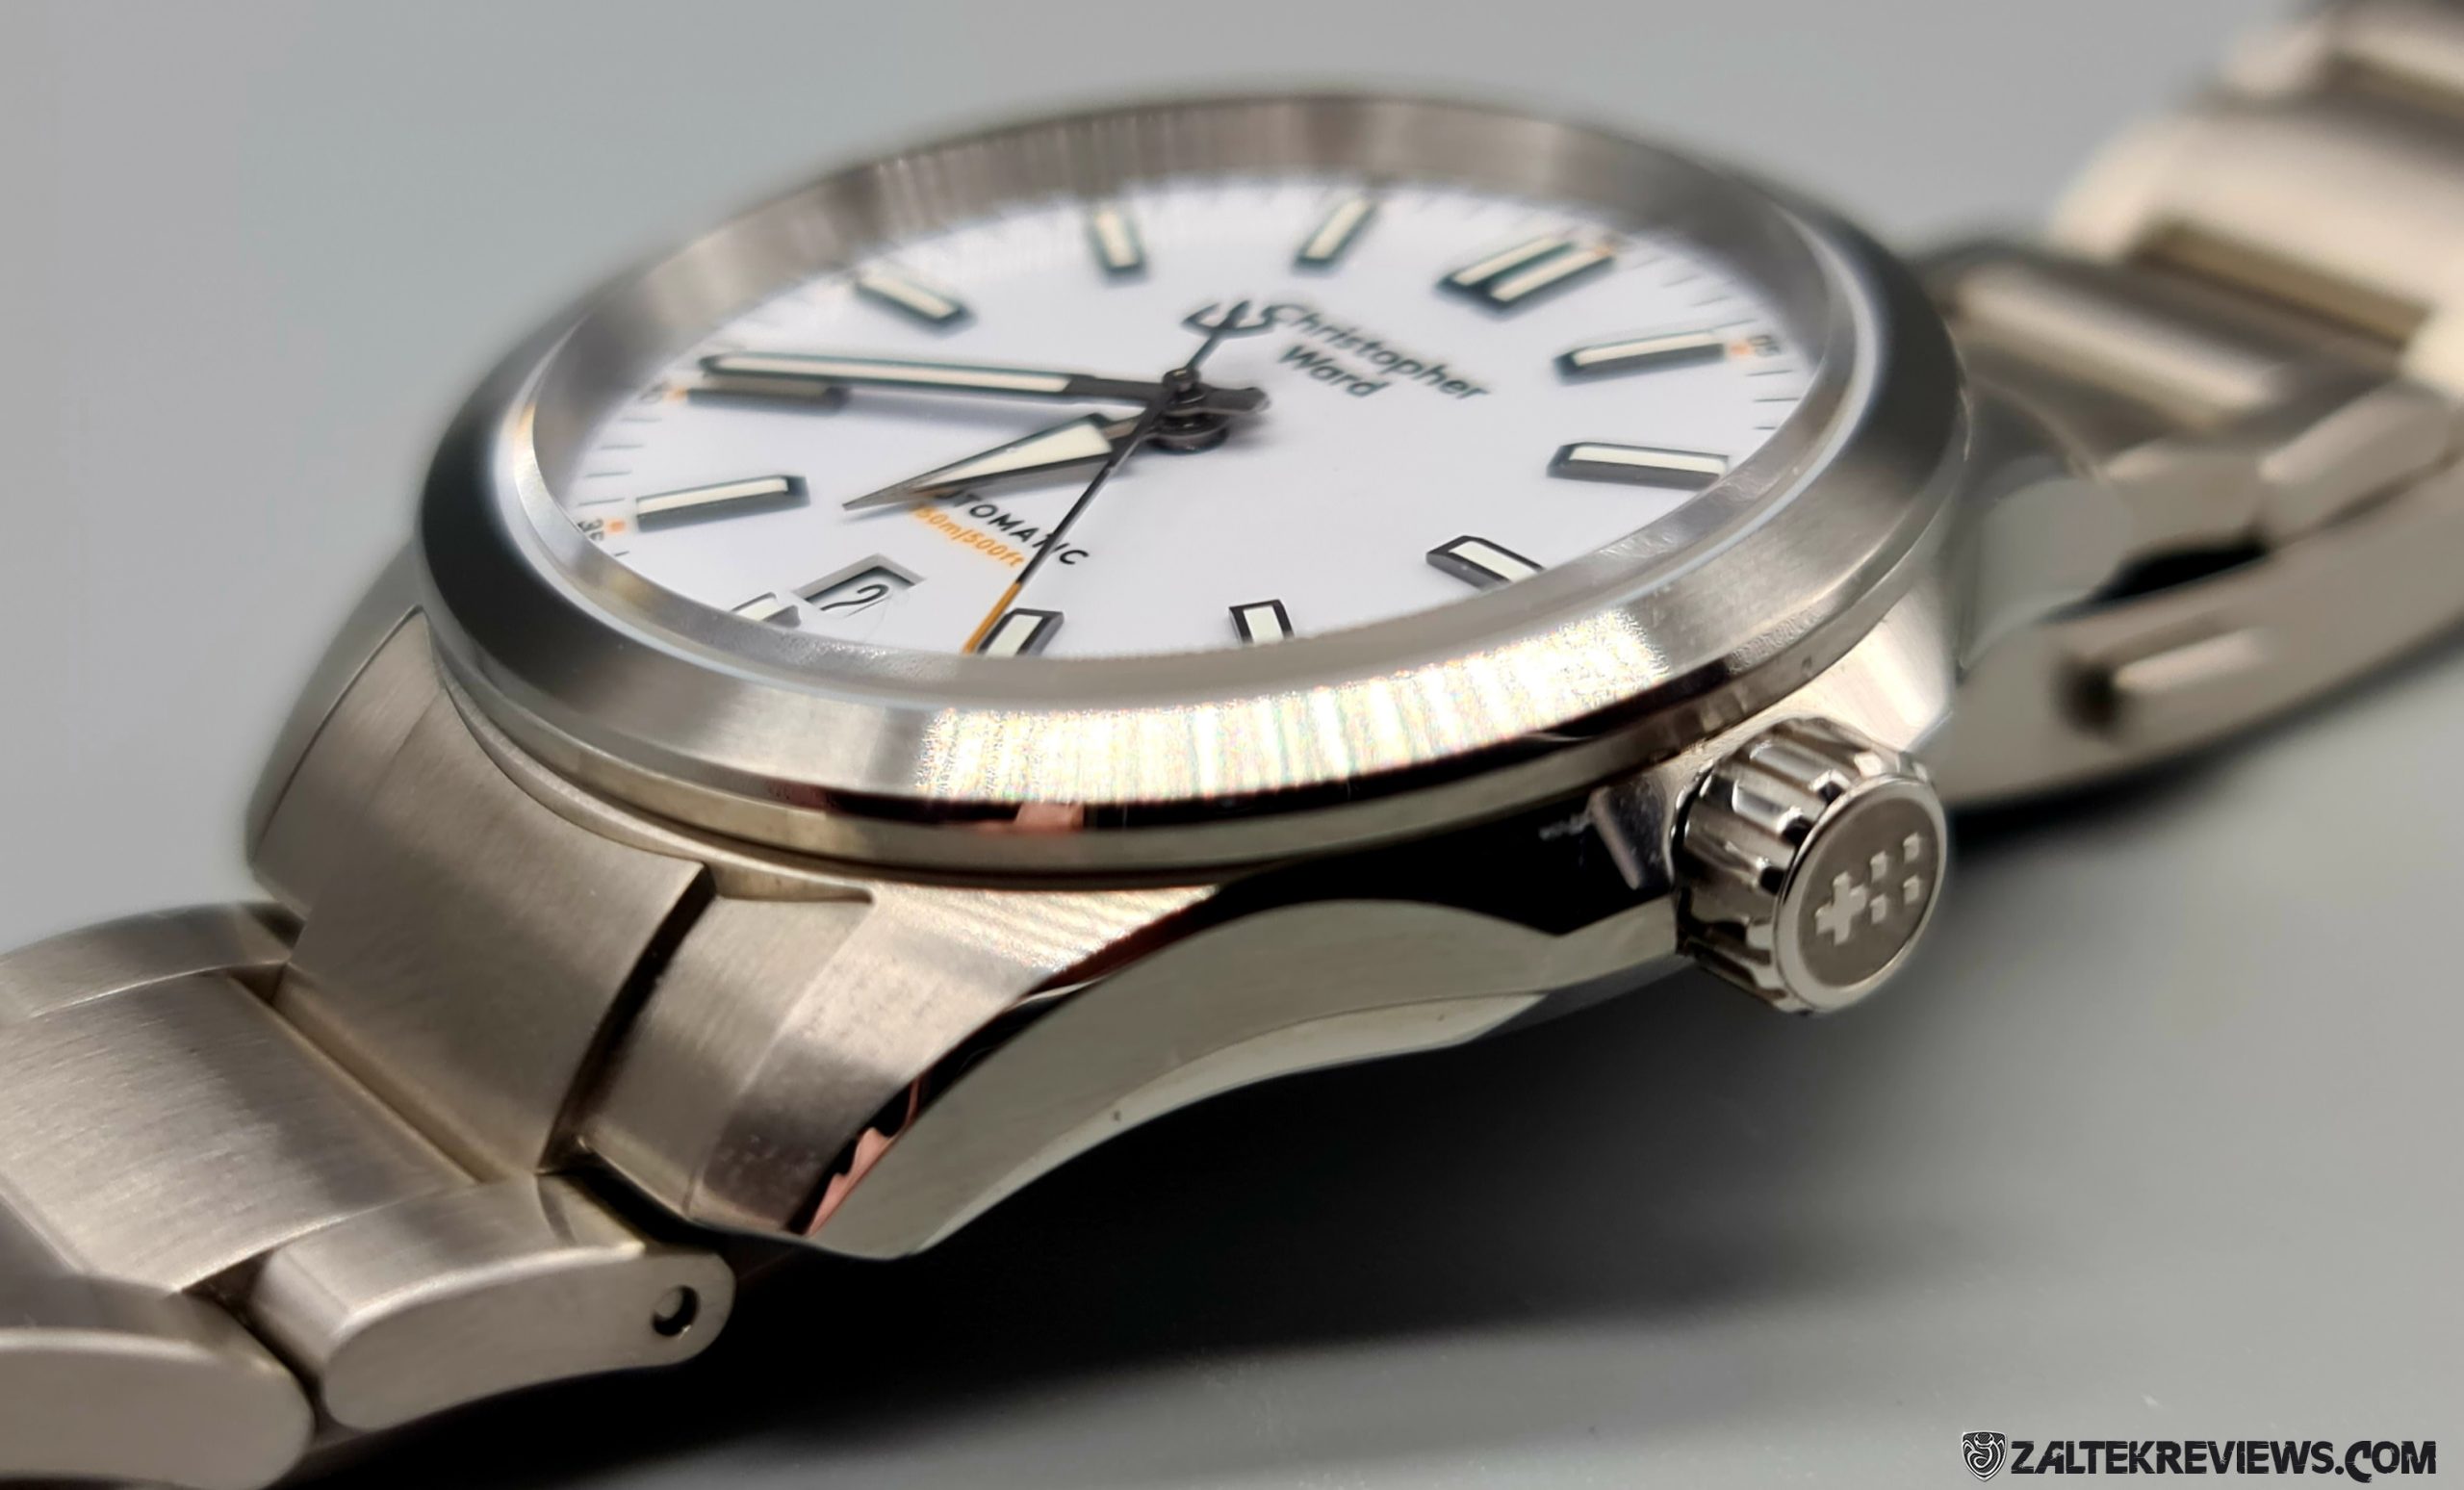 Christopher Ward C63 Sealander Automatic Review